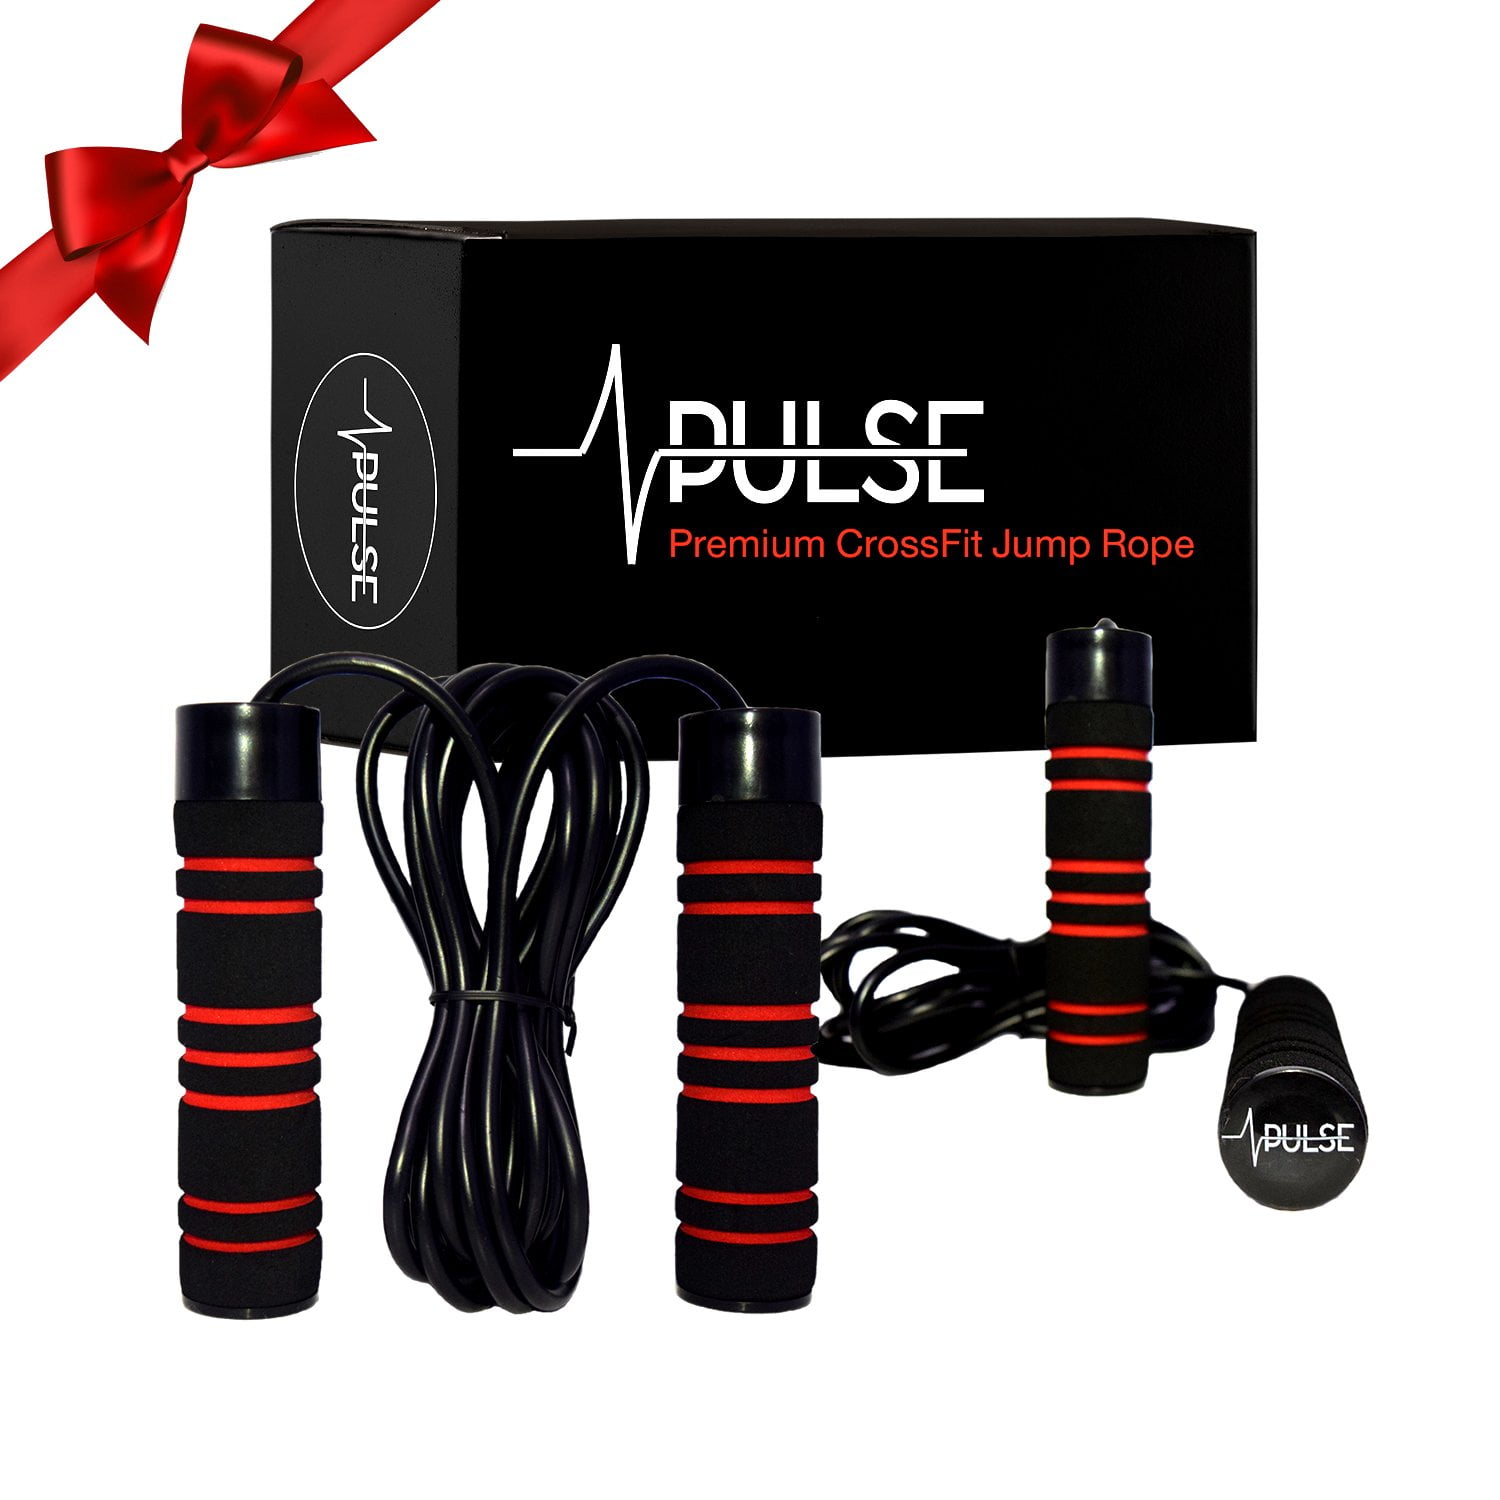 Weighted Jump Rope by Pulse (1LB) with Memory Foam Handles and Thick Speed Cable - For cardio, boxing and MMA , endurance training, Fitness Workouts, Jumping Exercise